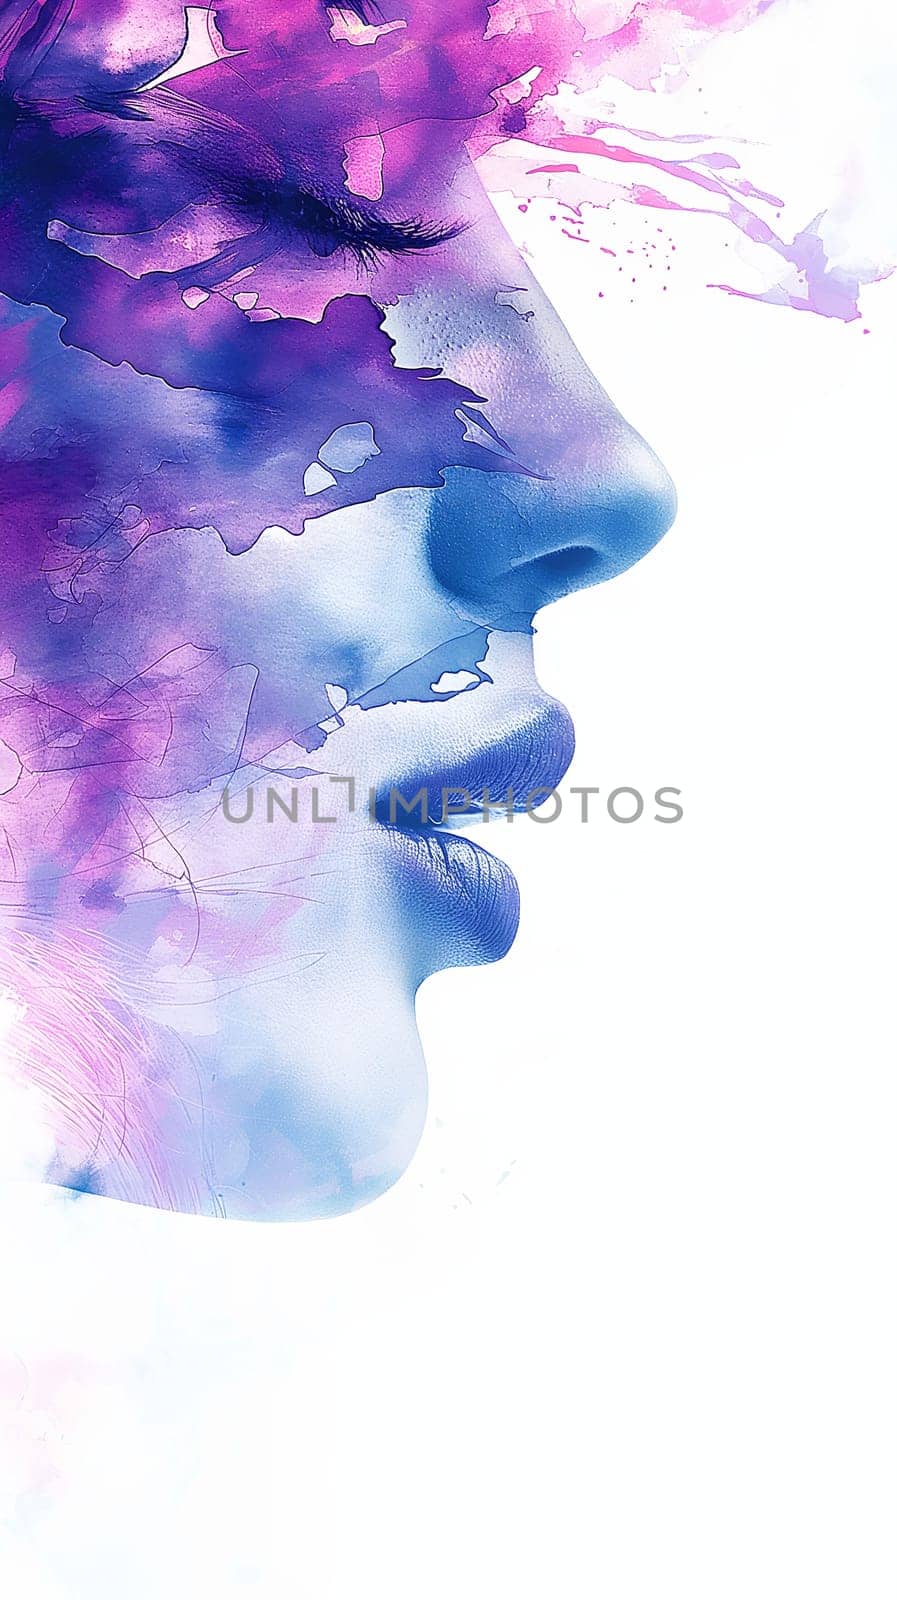 Profile View of a Woman in Watercolor Art by chrisroll